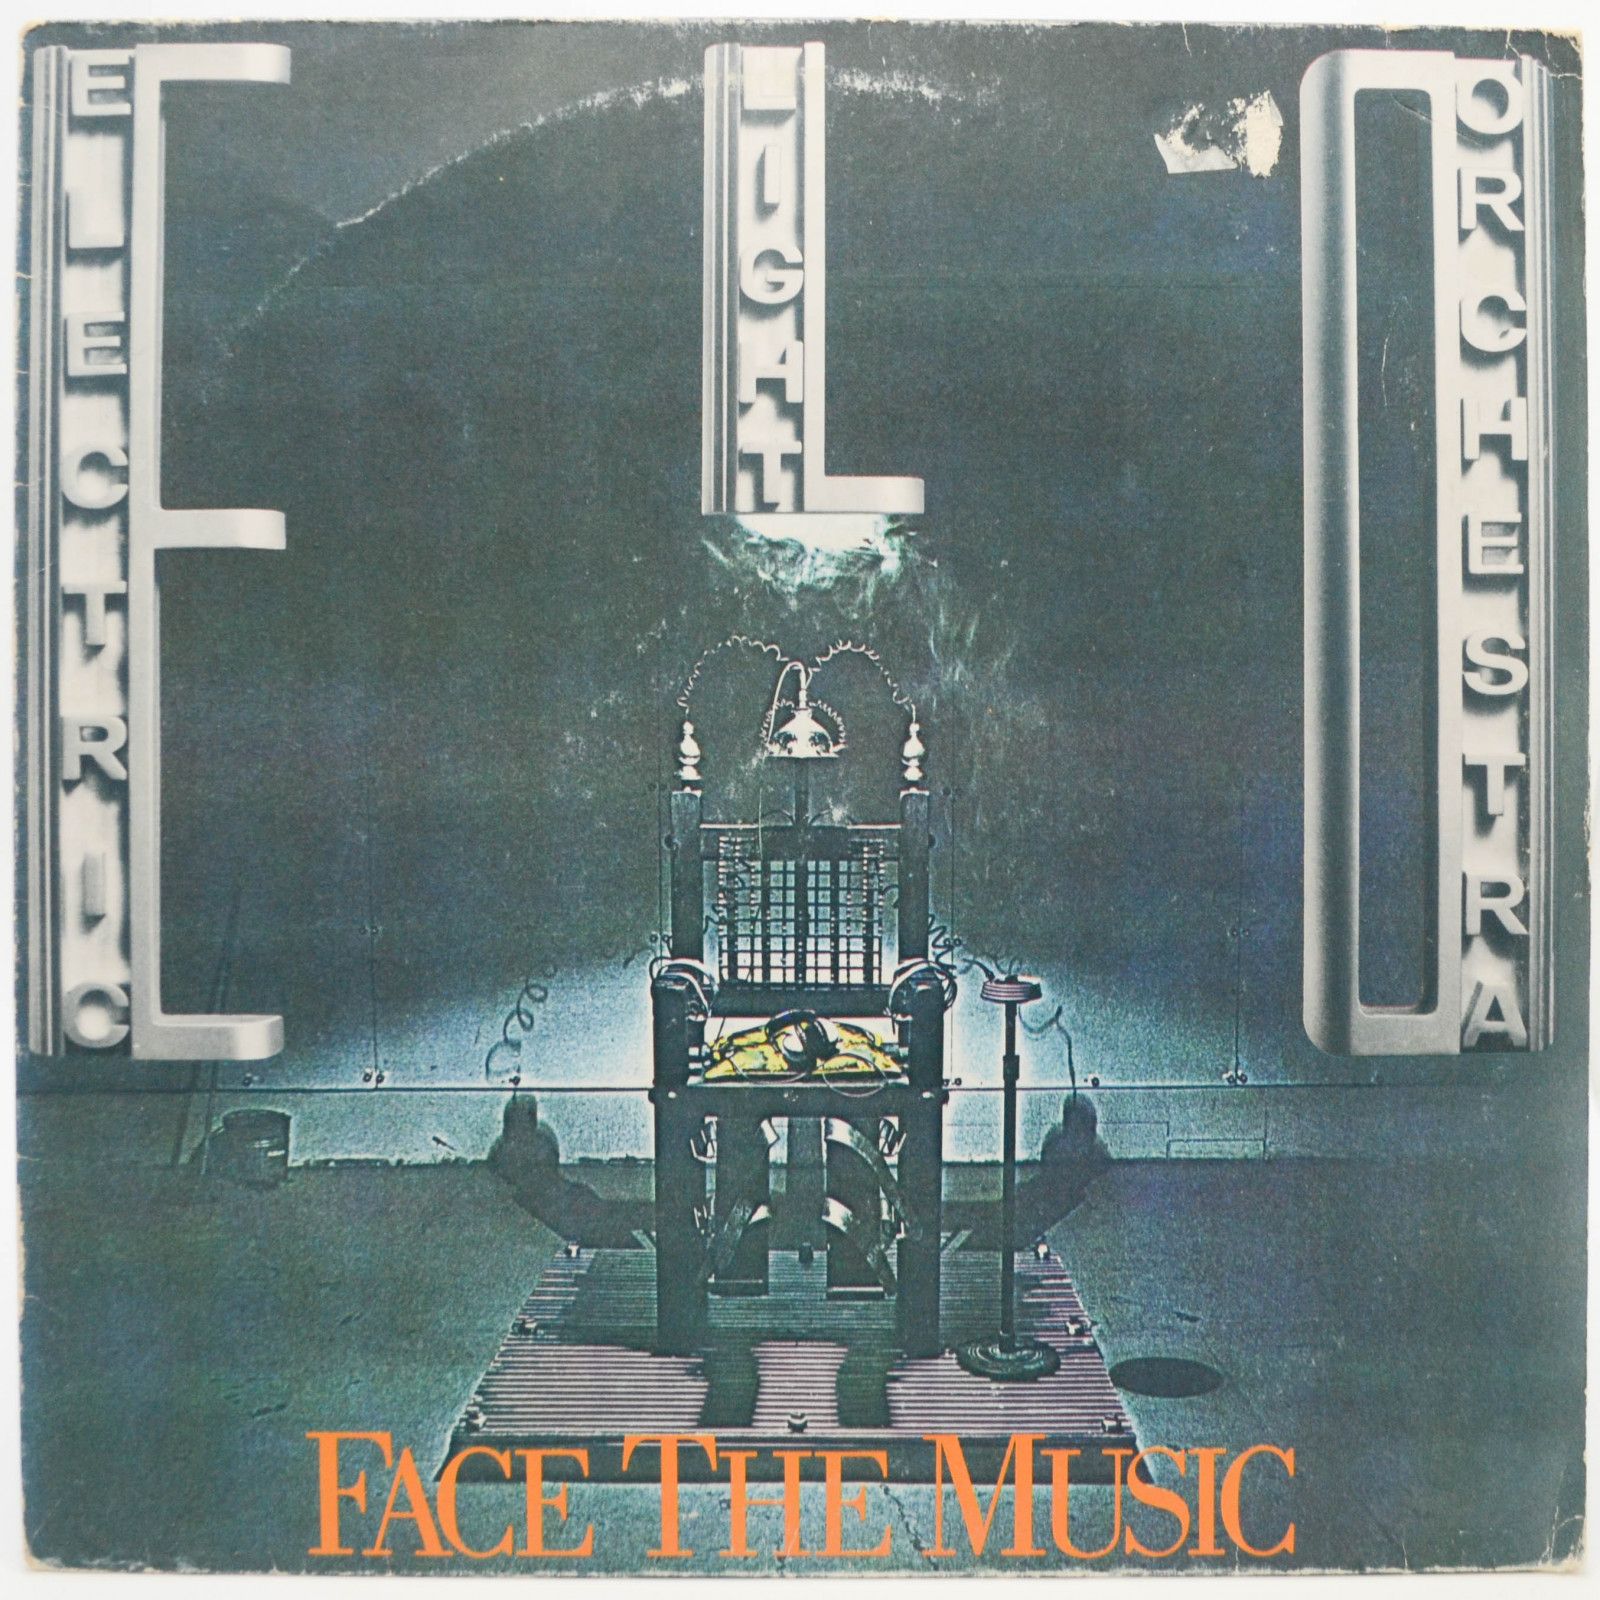 Electric Light Orchestra — Face The Music, 1975